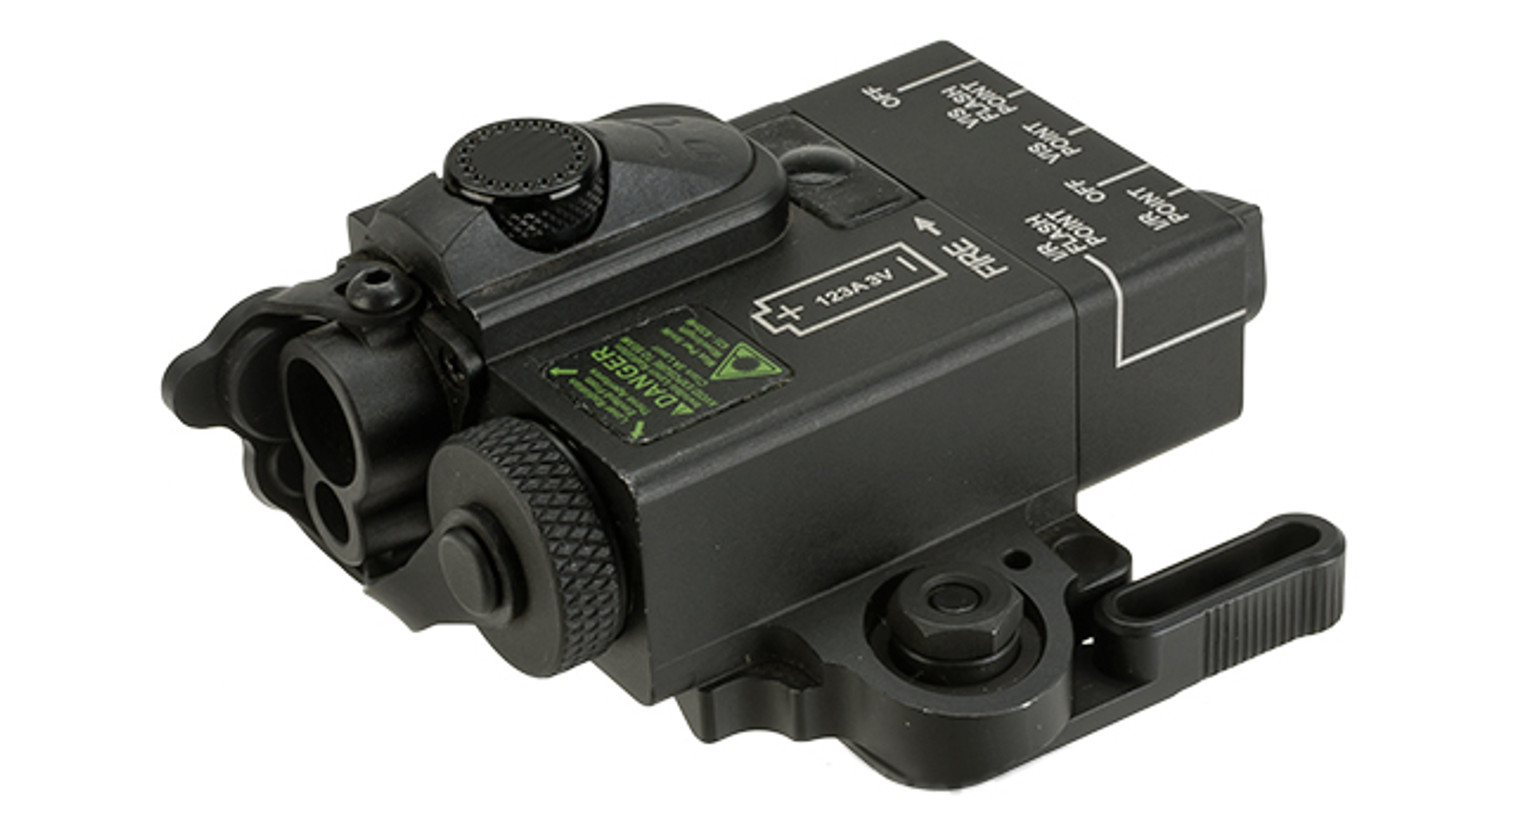 G&P Compact Dual Laser (Visible Red / Infrared) Designator - Black